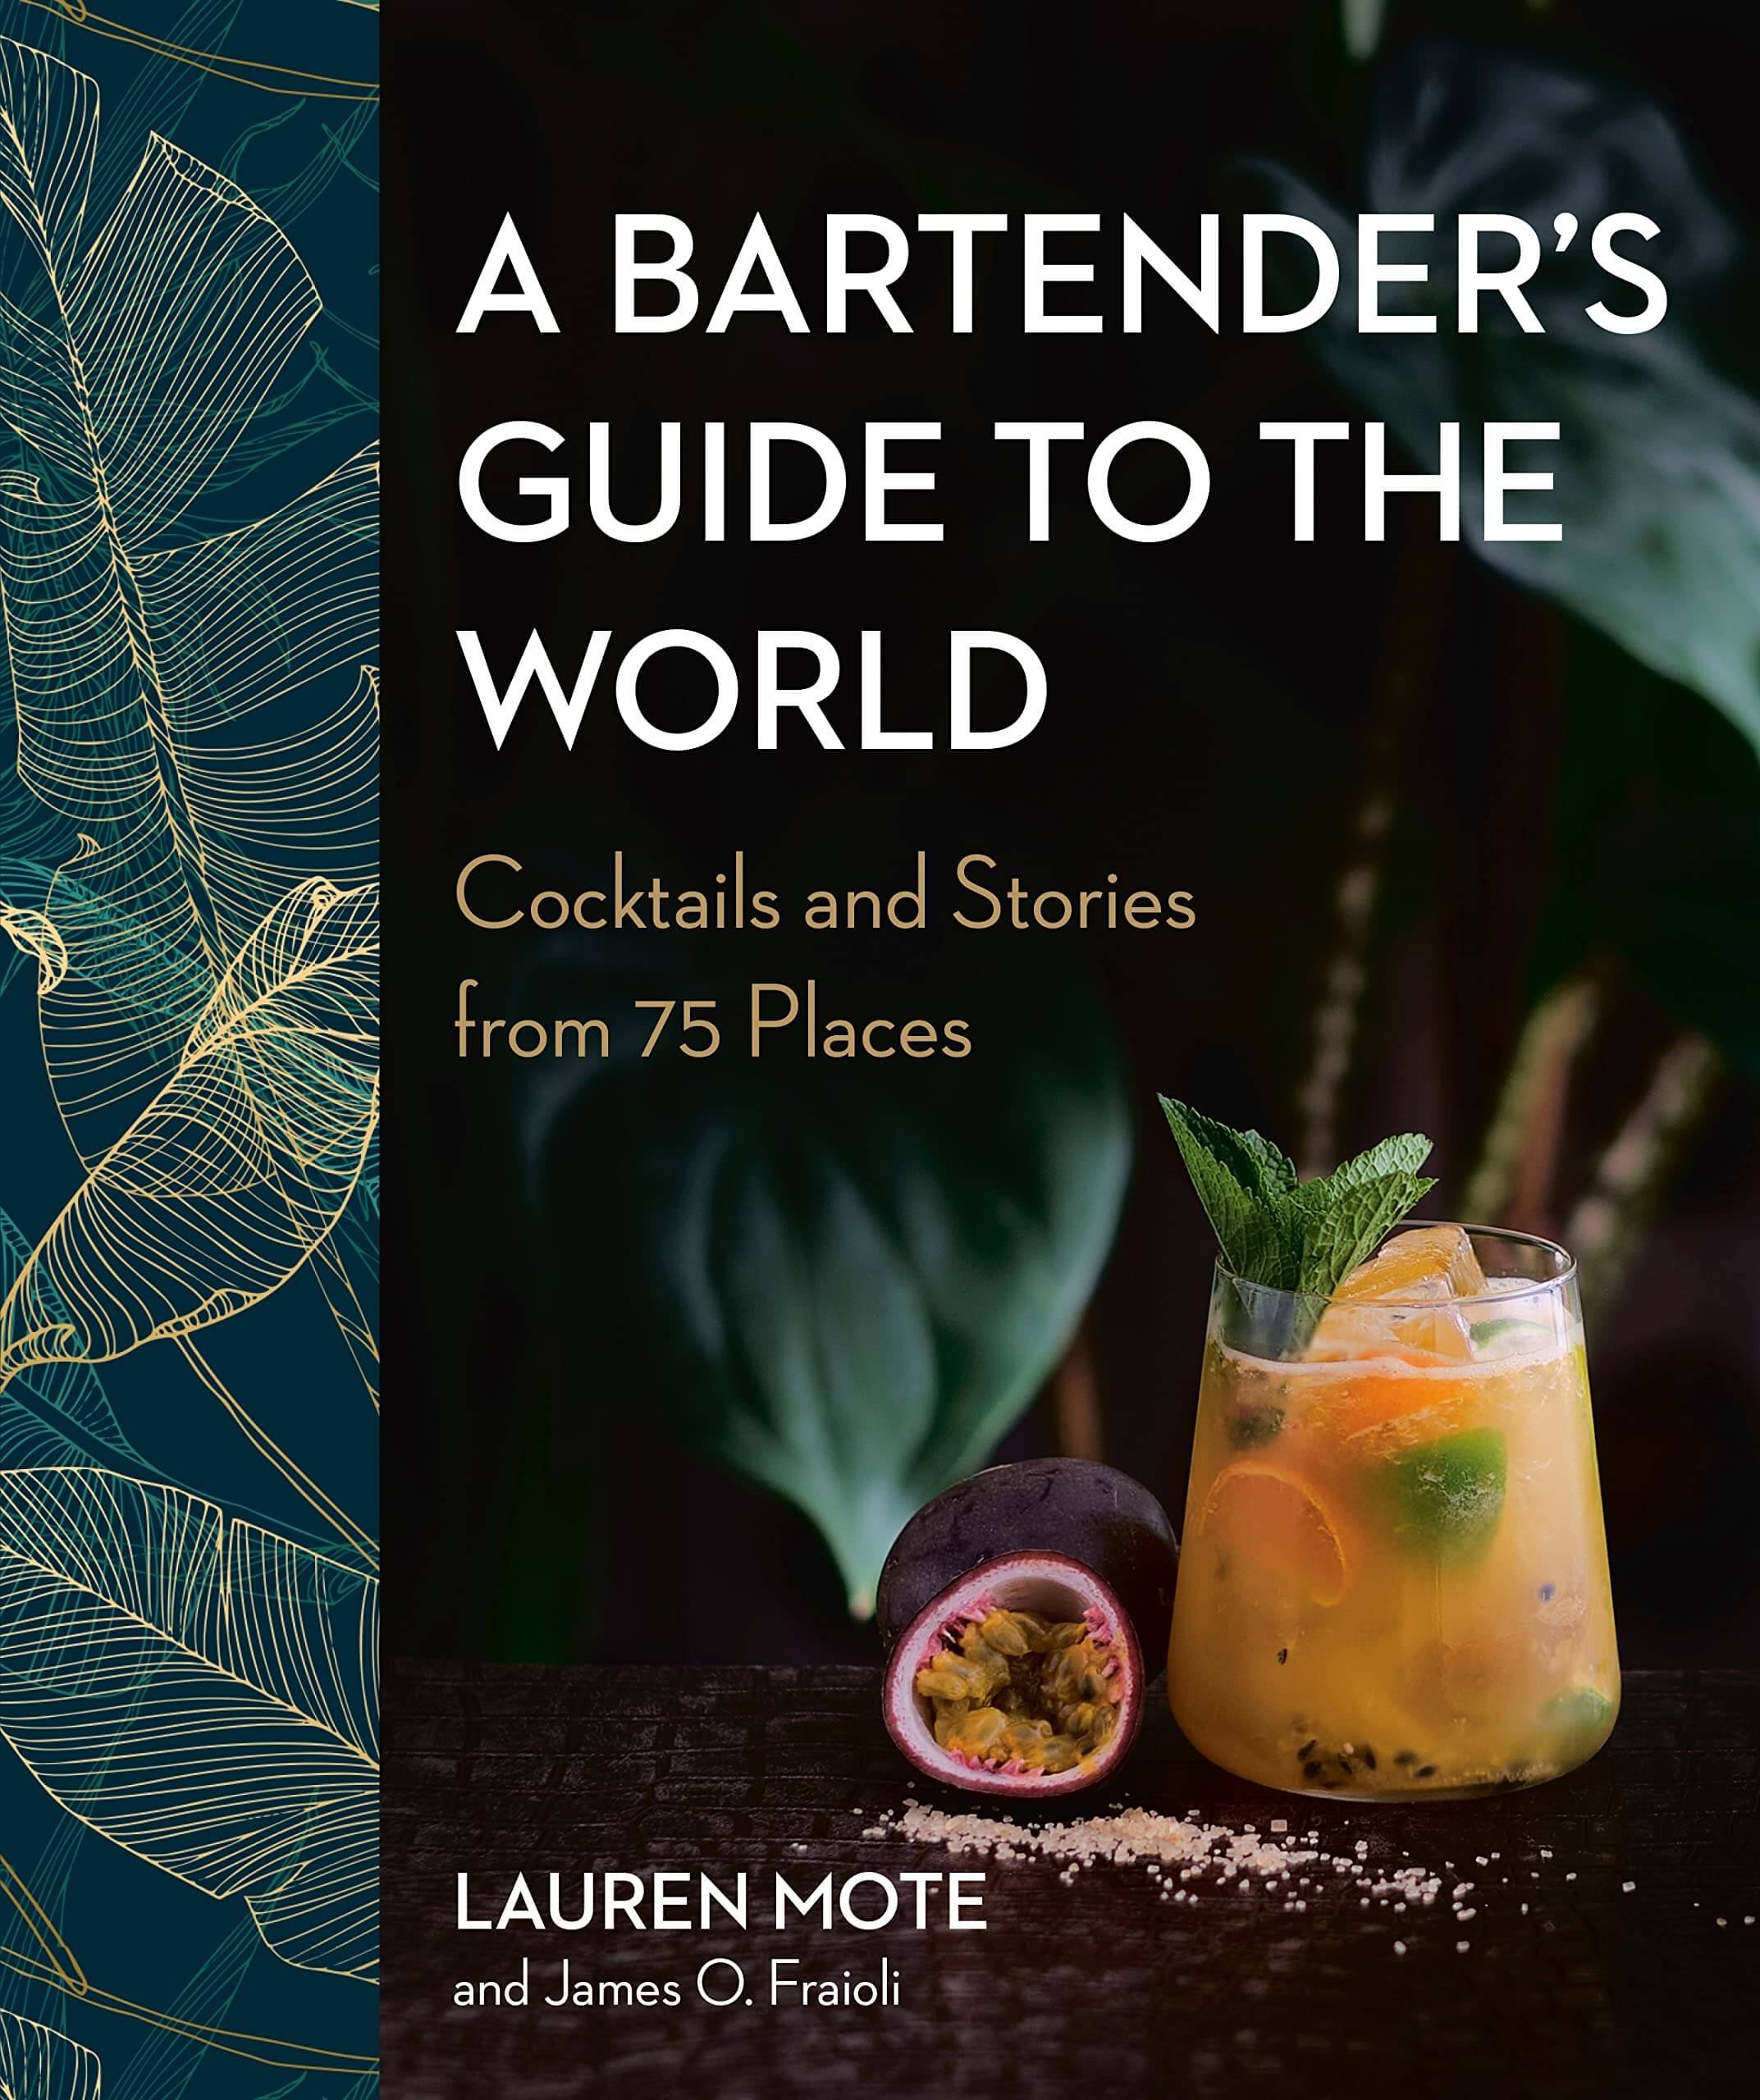 10 Top New Cocktail & Spirits Books of Winter 2022